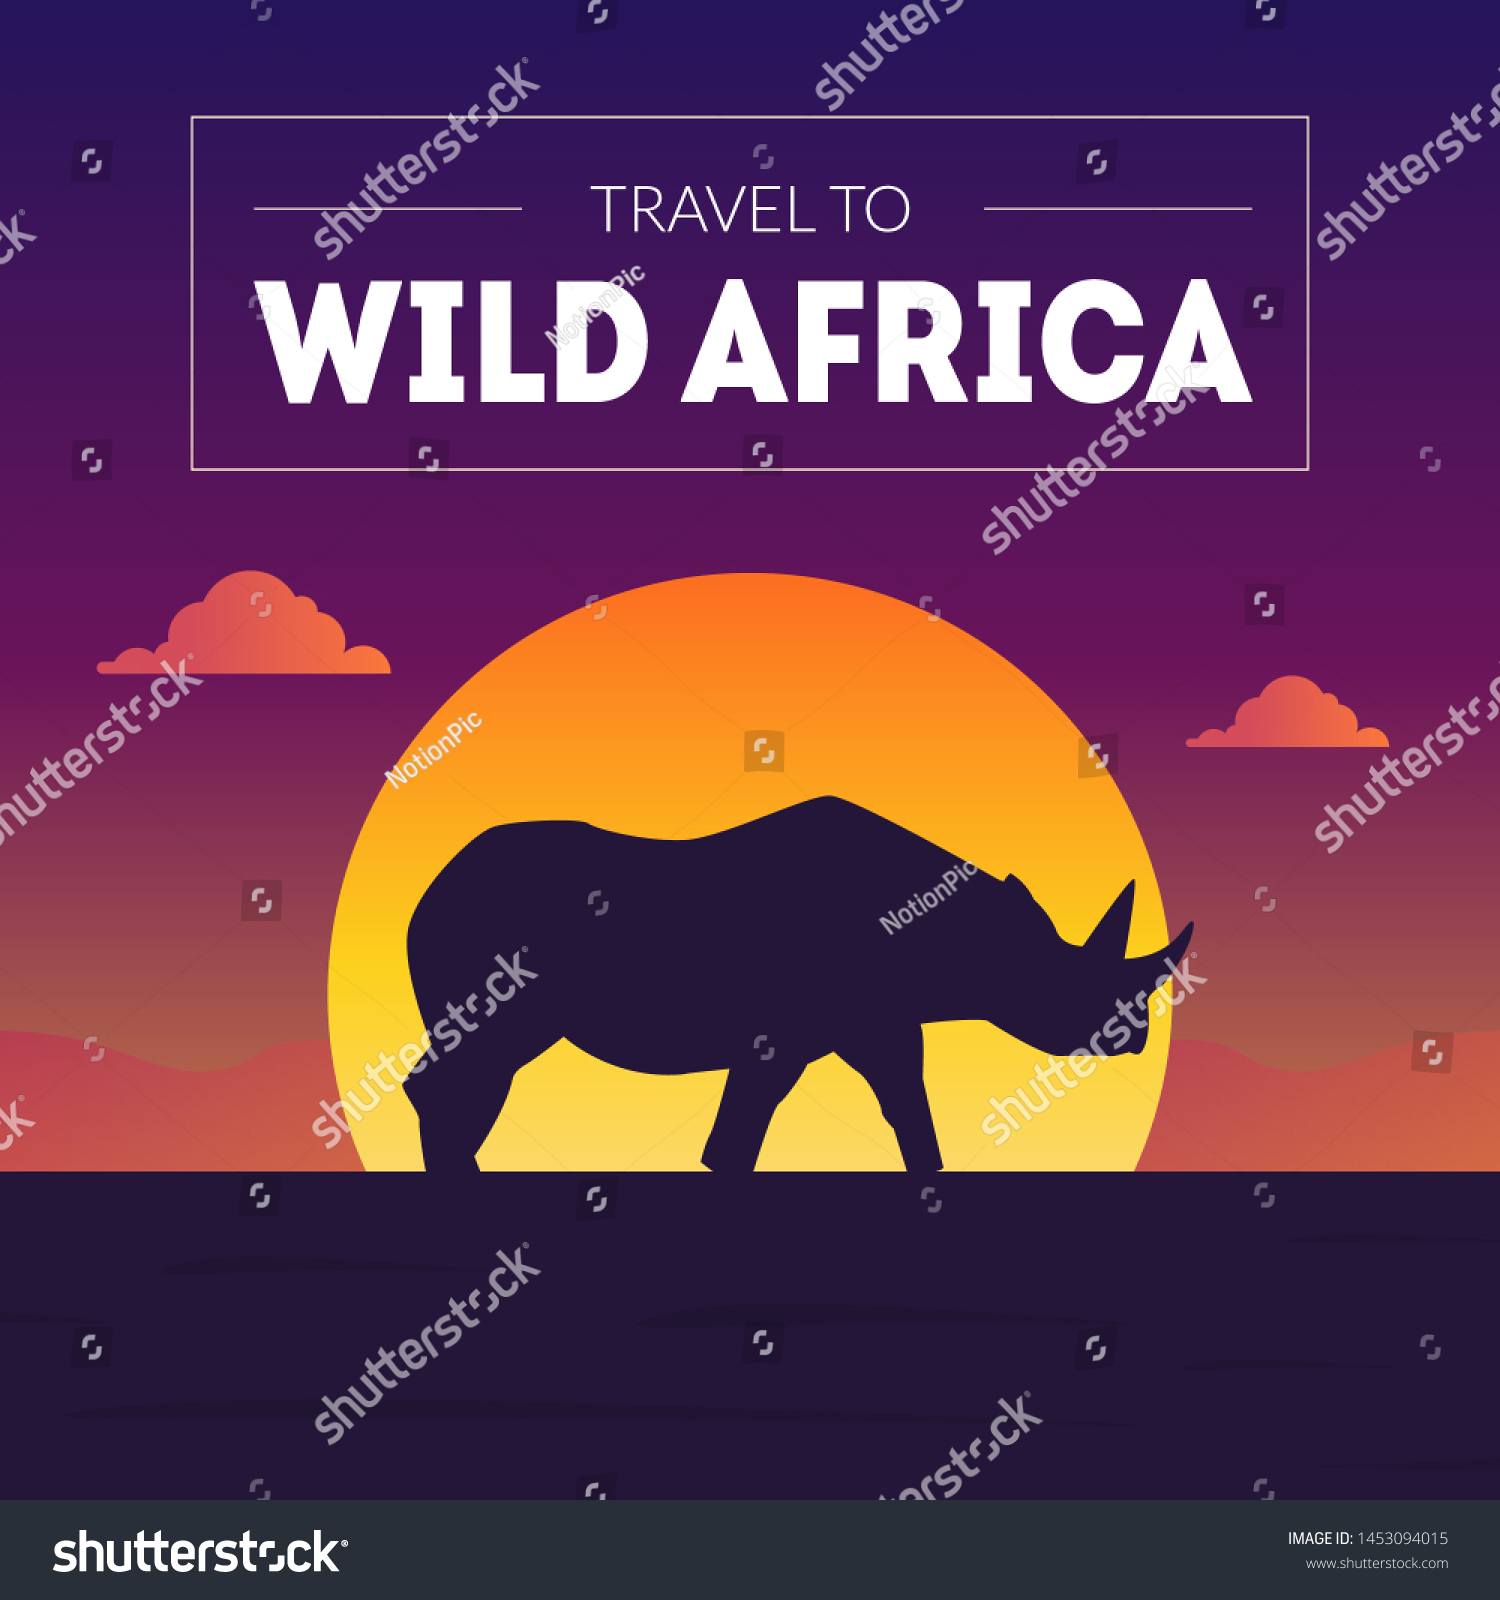 Wild Africa Banner Template Beautiful African Stock Vector Royalty Free 1453094015 Shutterstock 0914